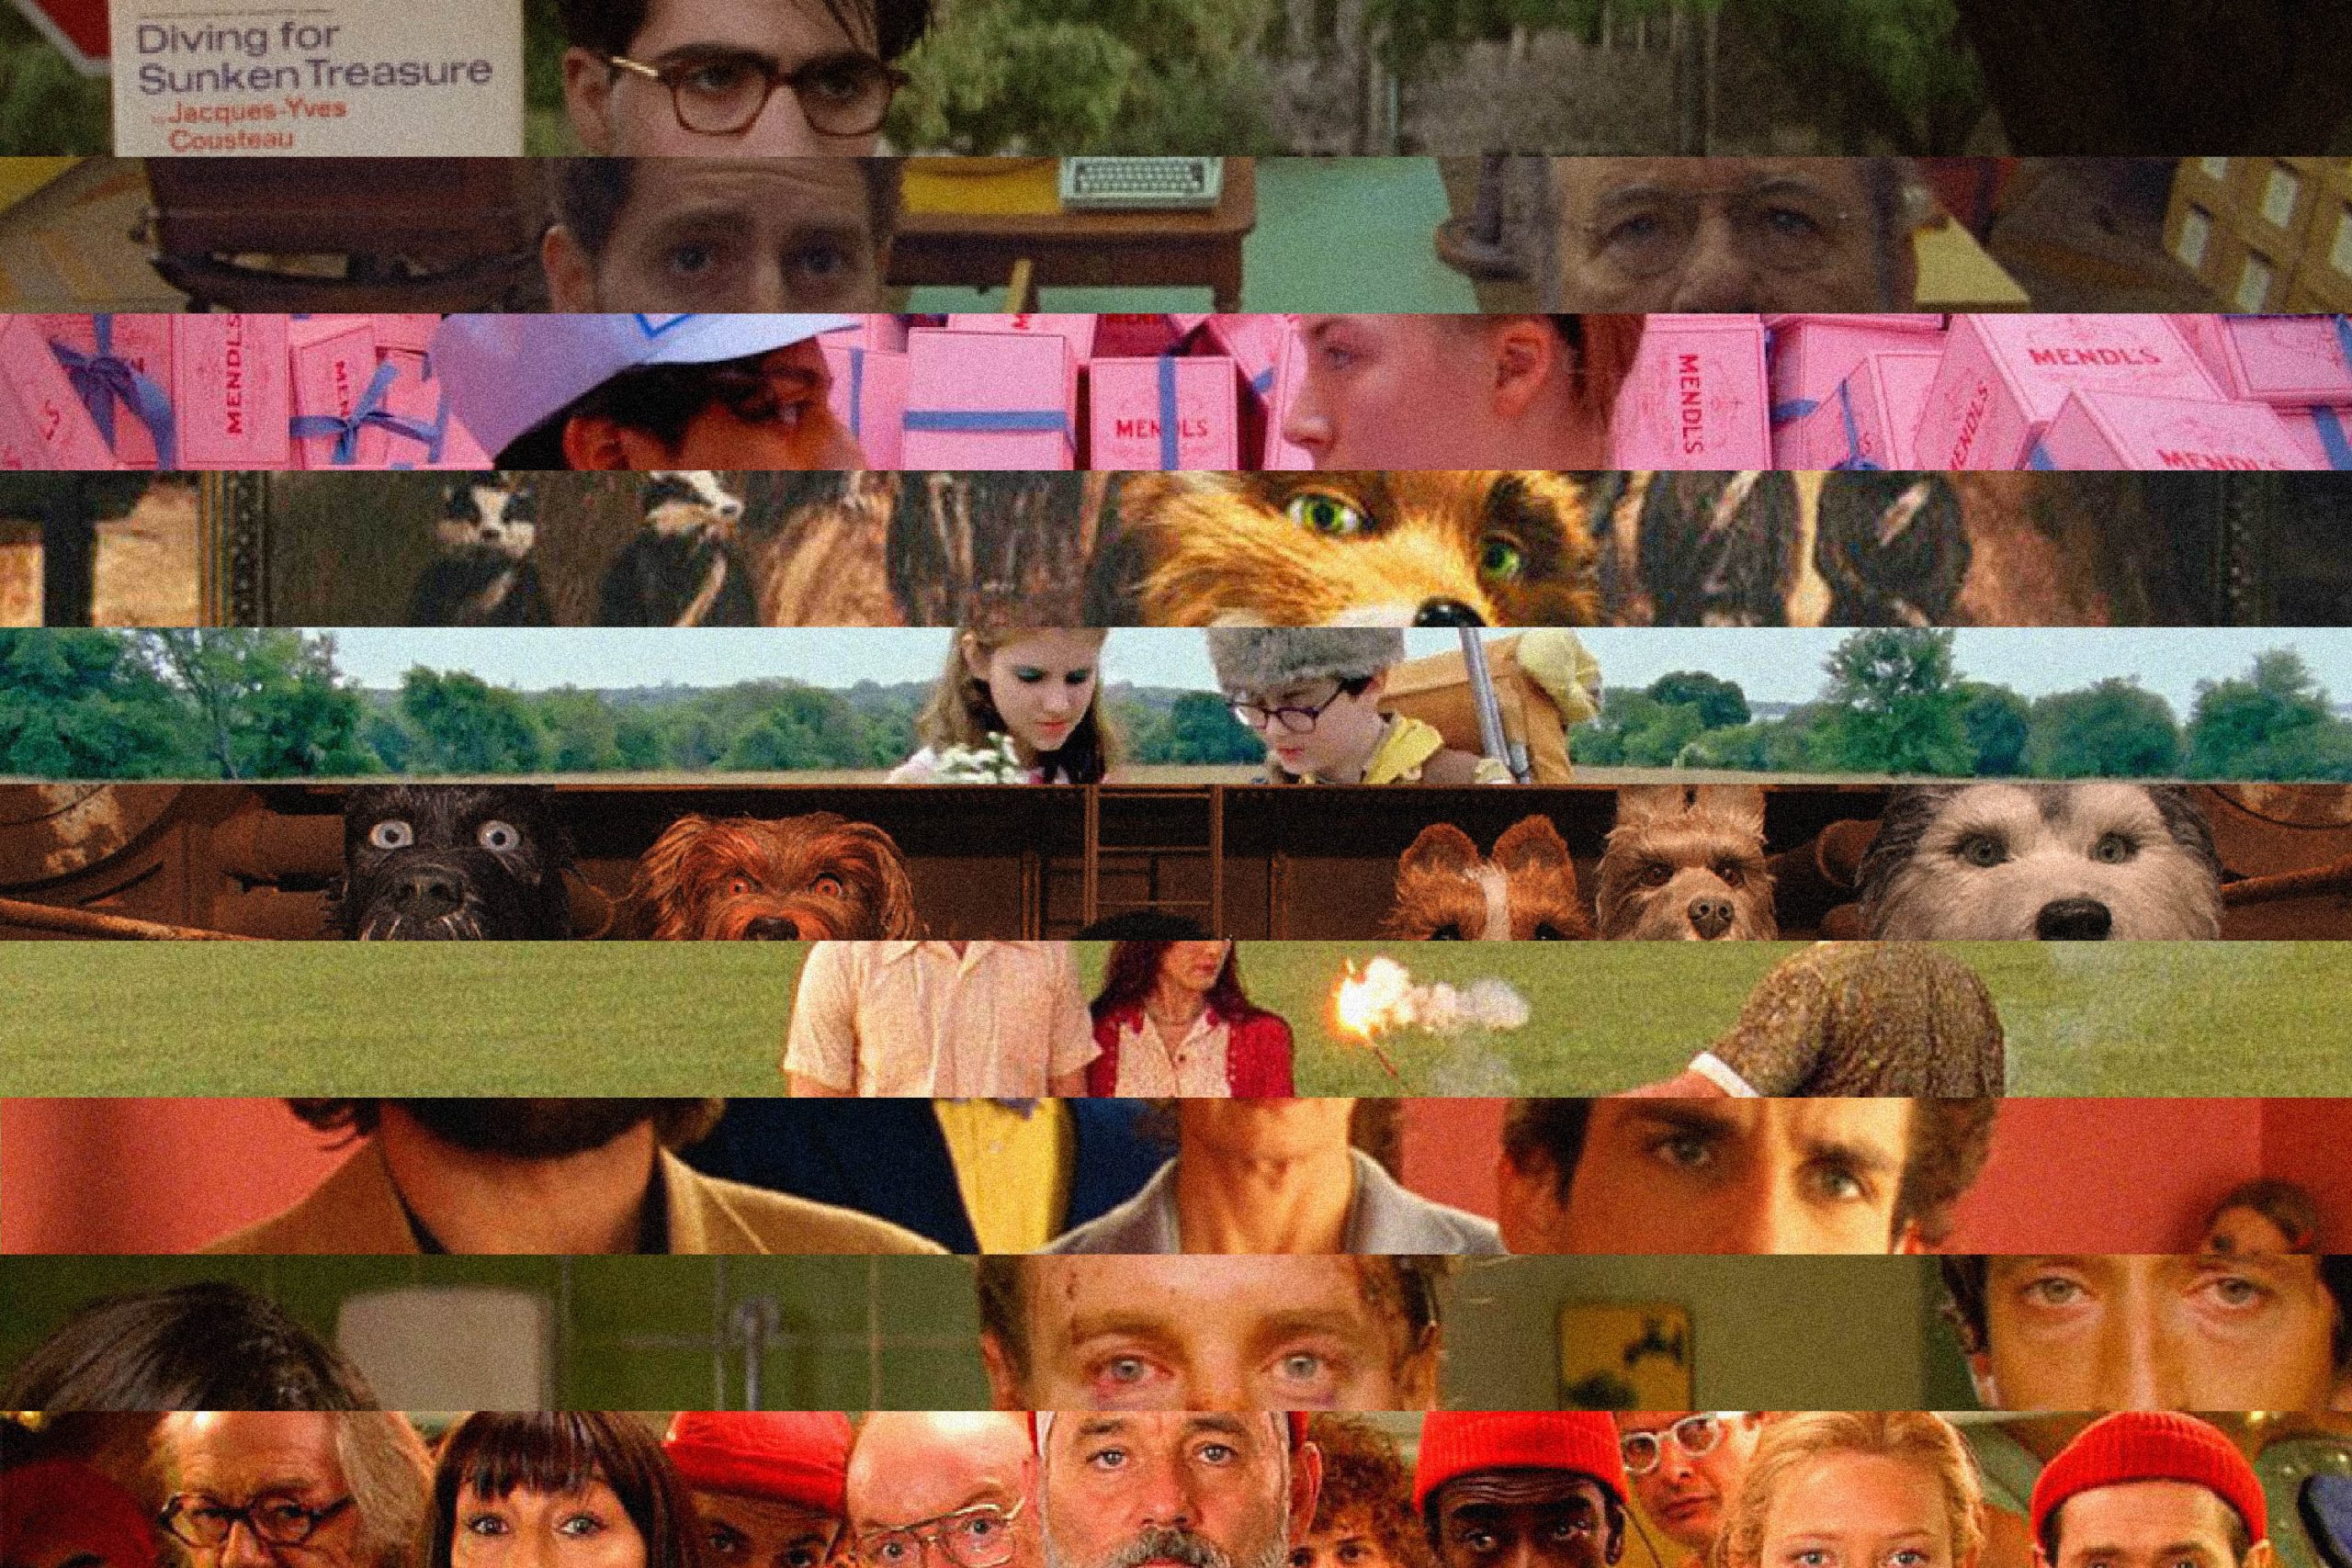 I watched every Wes Anderson film so you don't have to